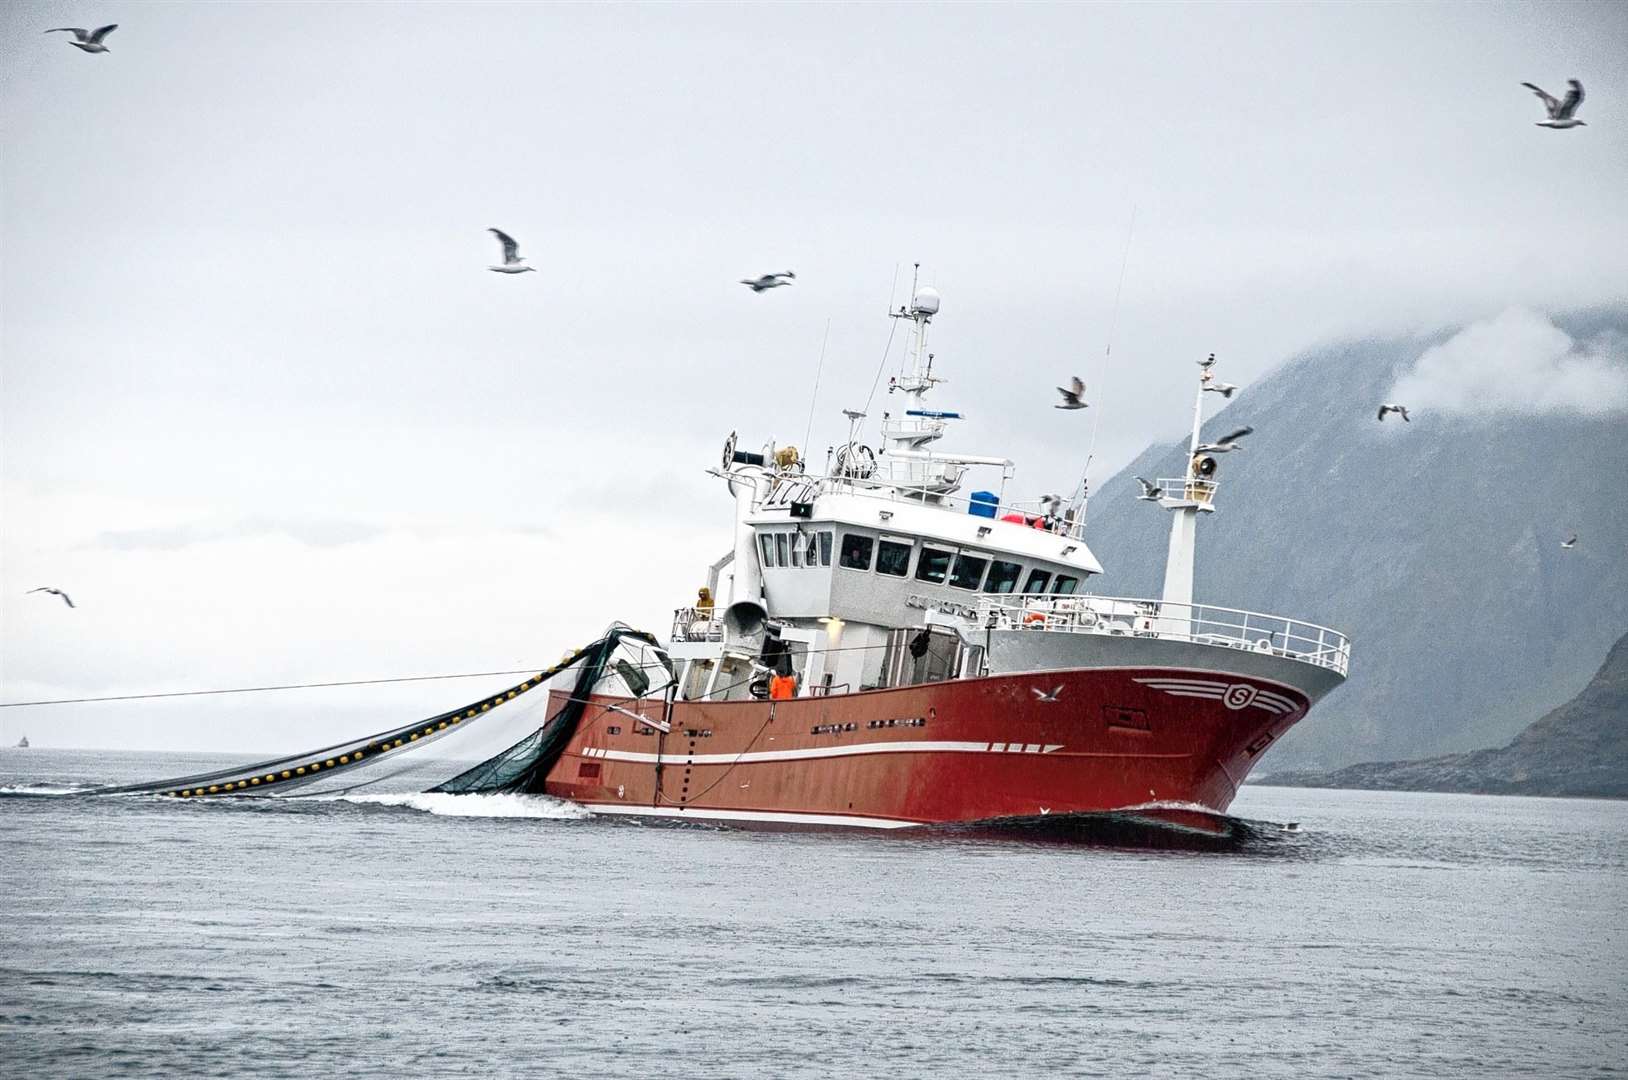 New funding has been announced to help with safety for fishermen.